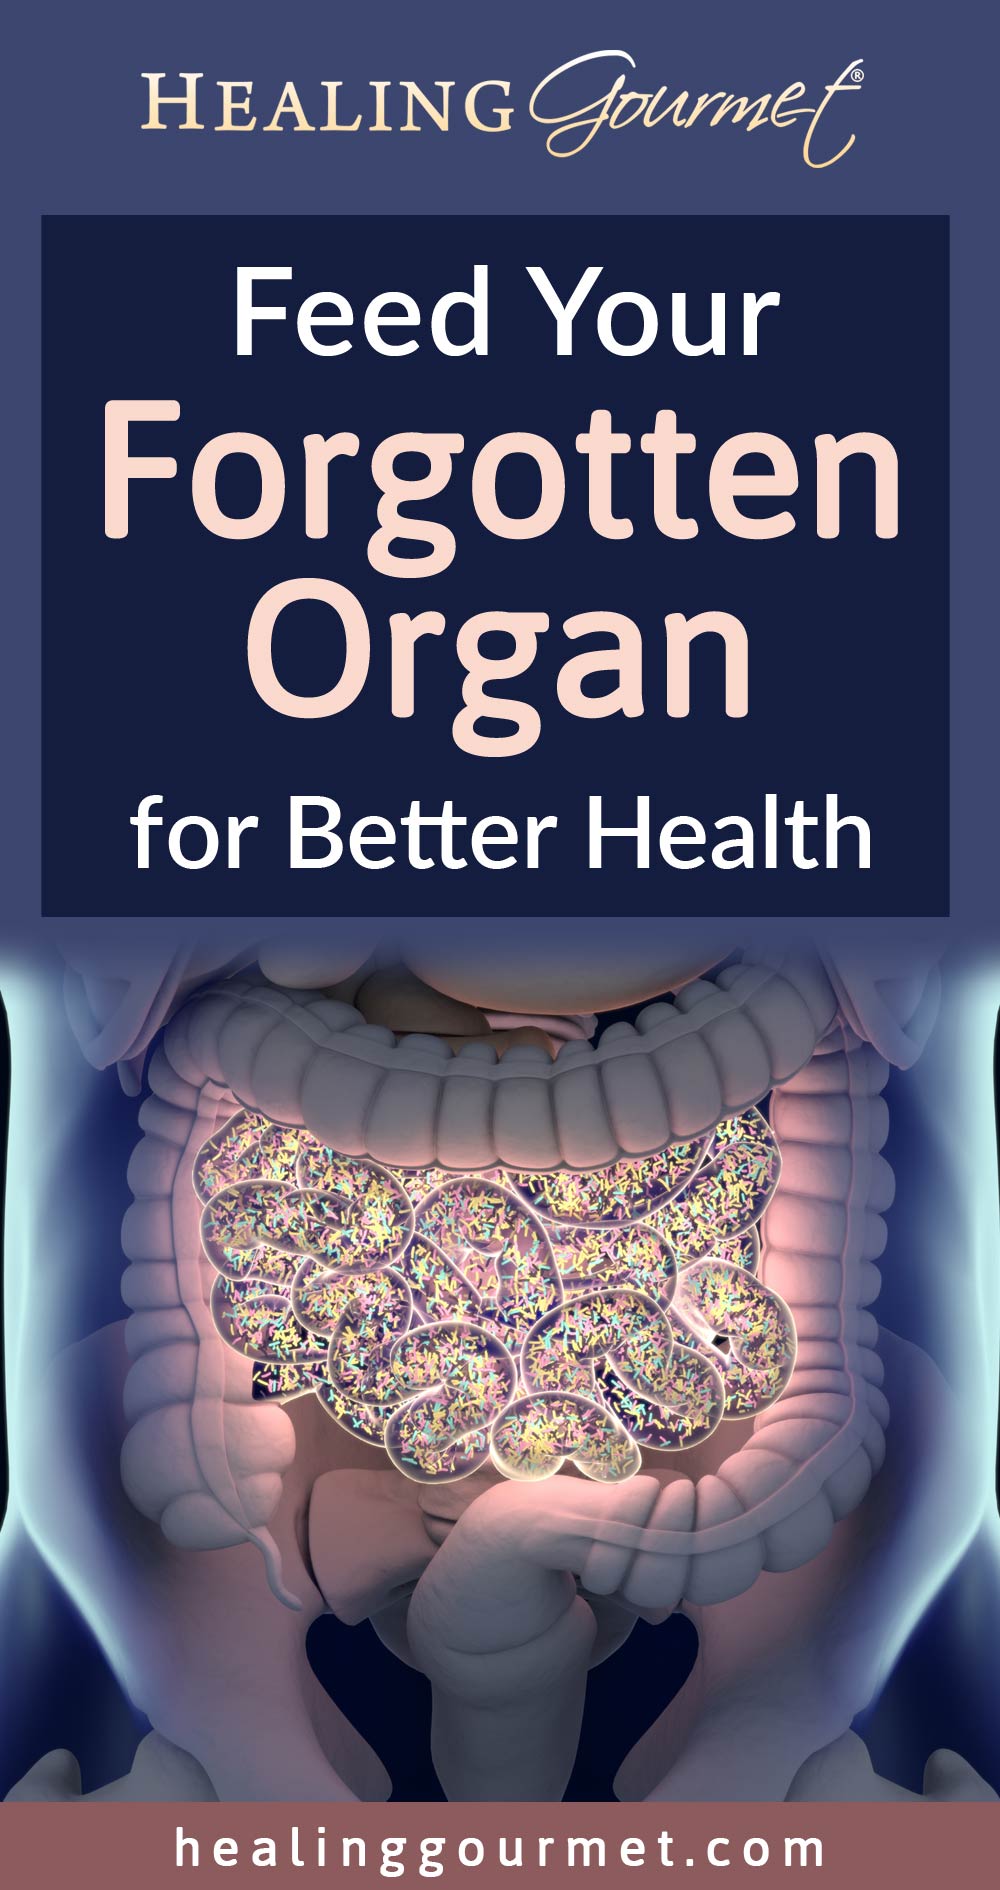 Feed Your Forgotten Organ for Better Health